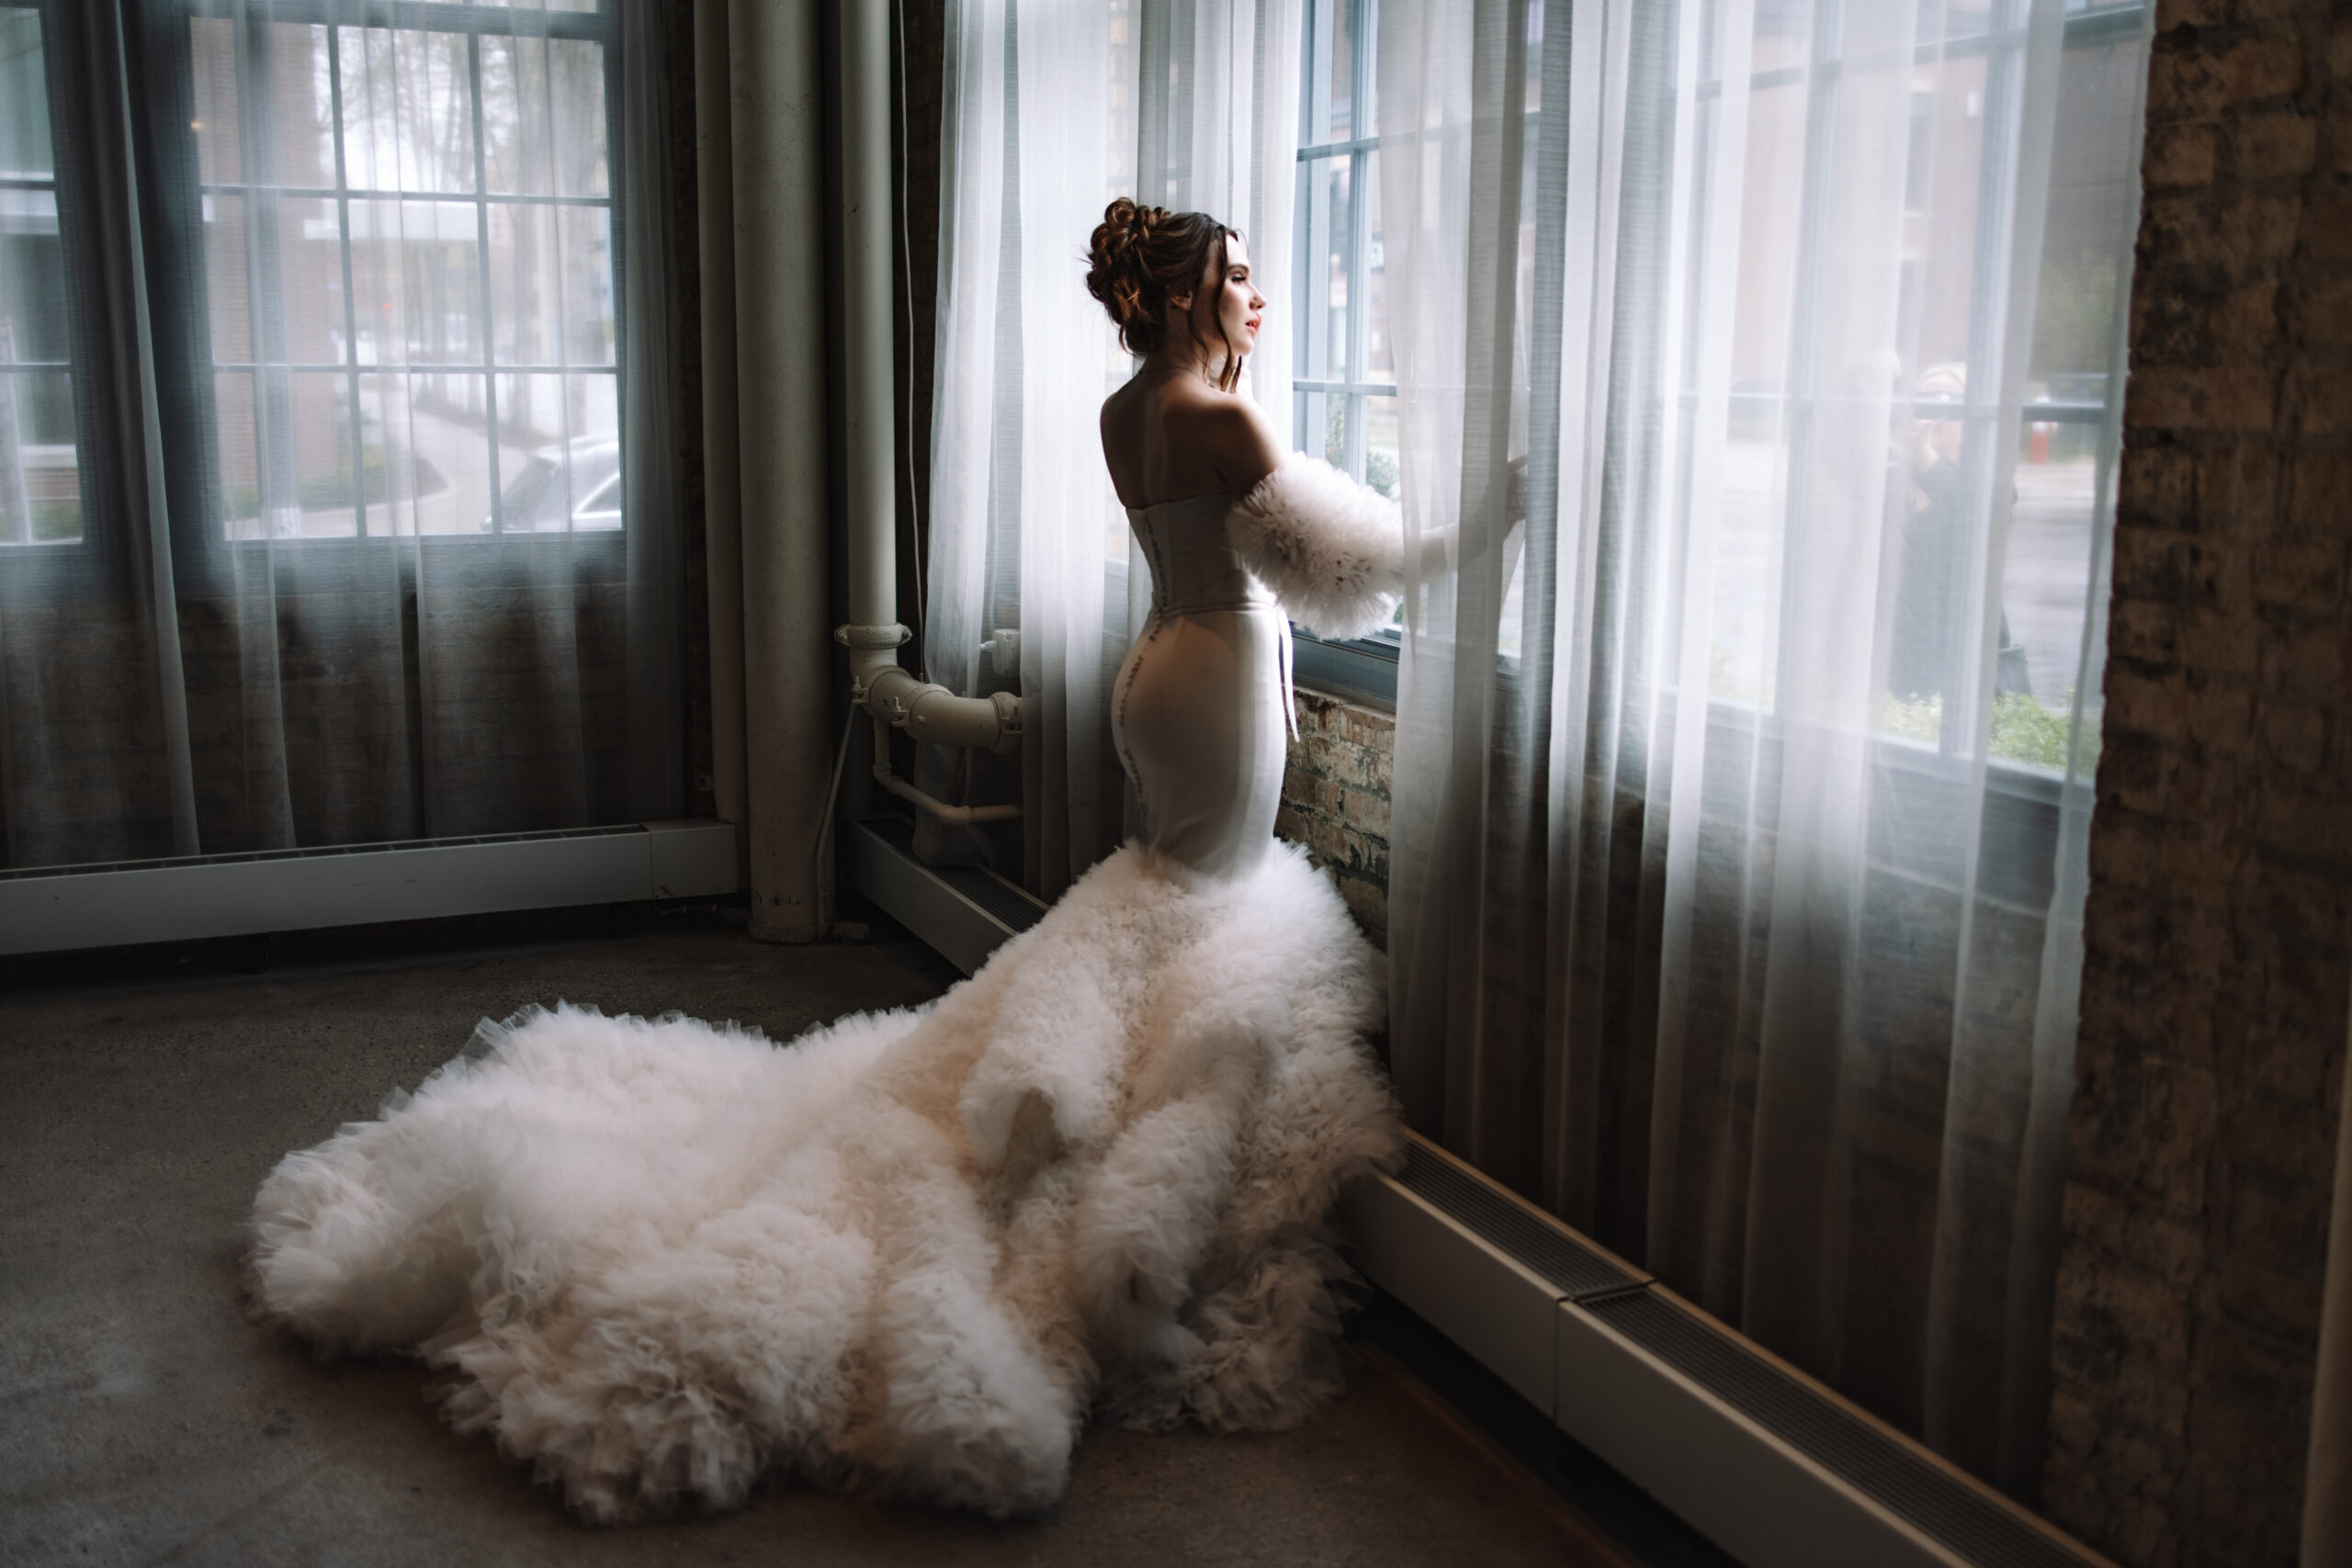 A modern, elegant bride in a voluptuous dress with sleeves, staring out the window as the light illuminates her face